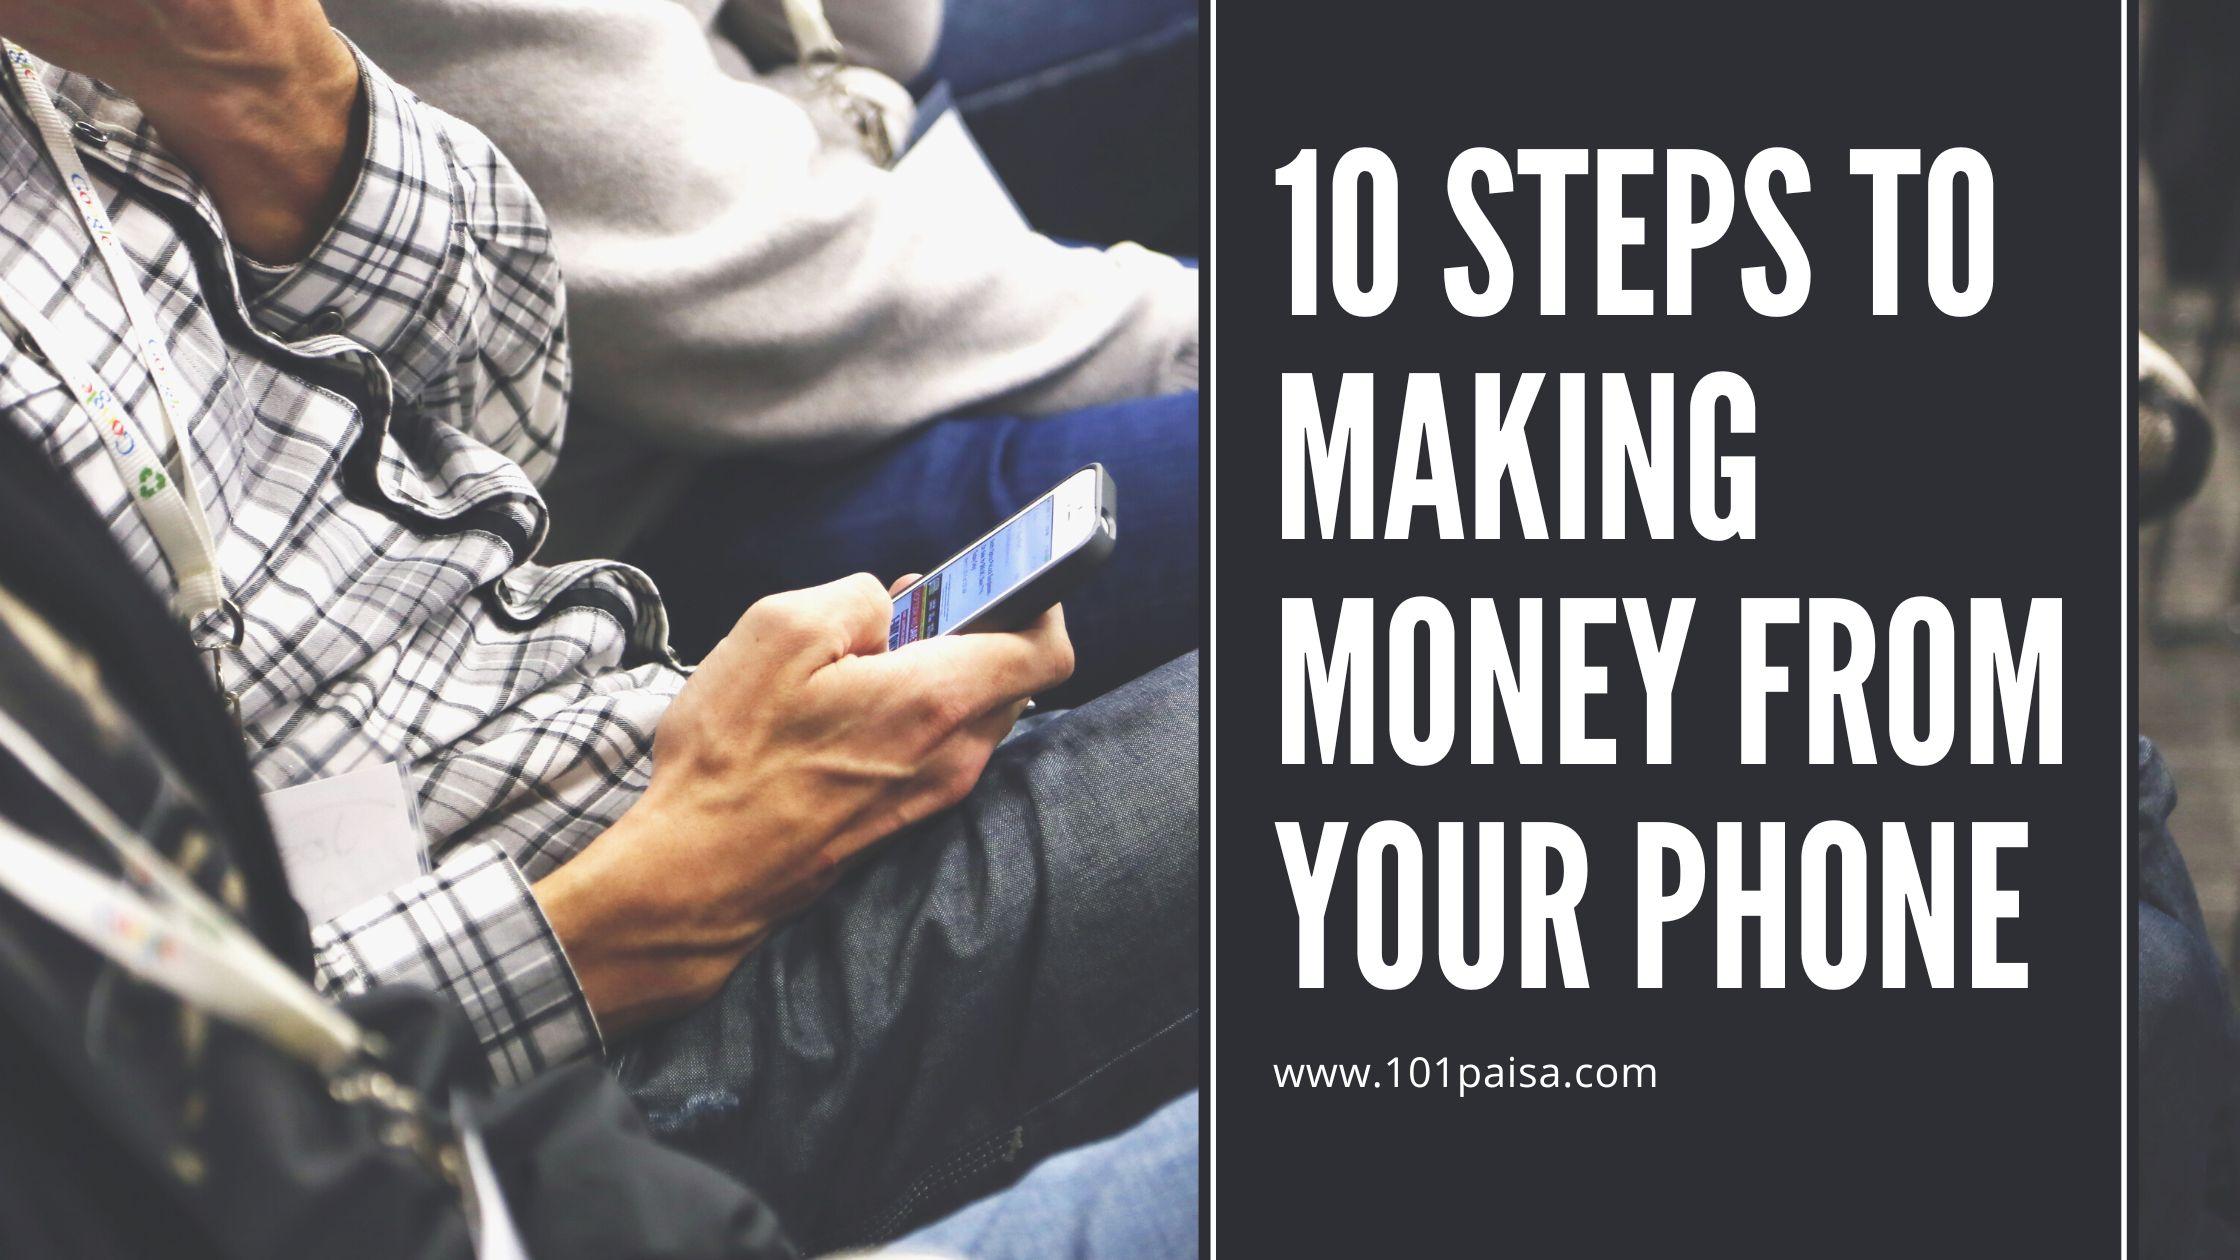 Know 10 Steps to Making Money From Your Phone